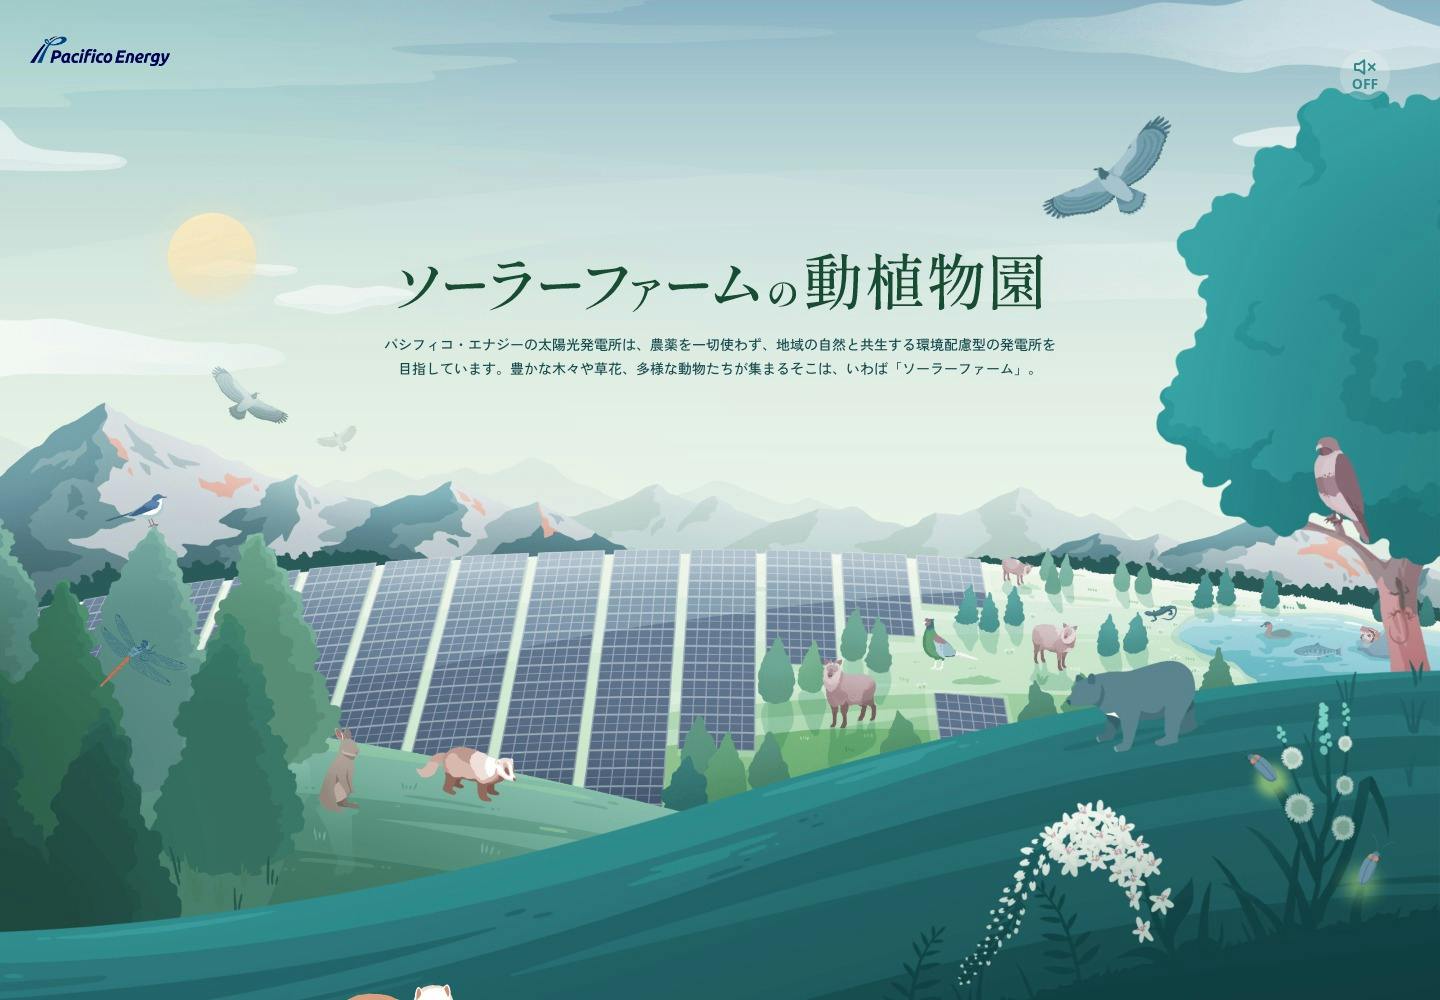 Cover Image for ソーラーファームの動植物園 – パシフィコ・エナジー株式会社